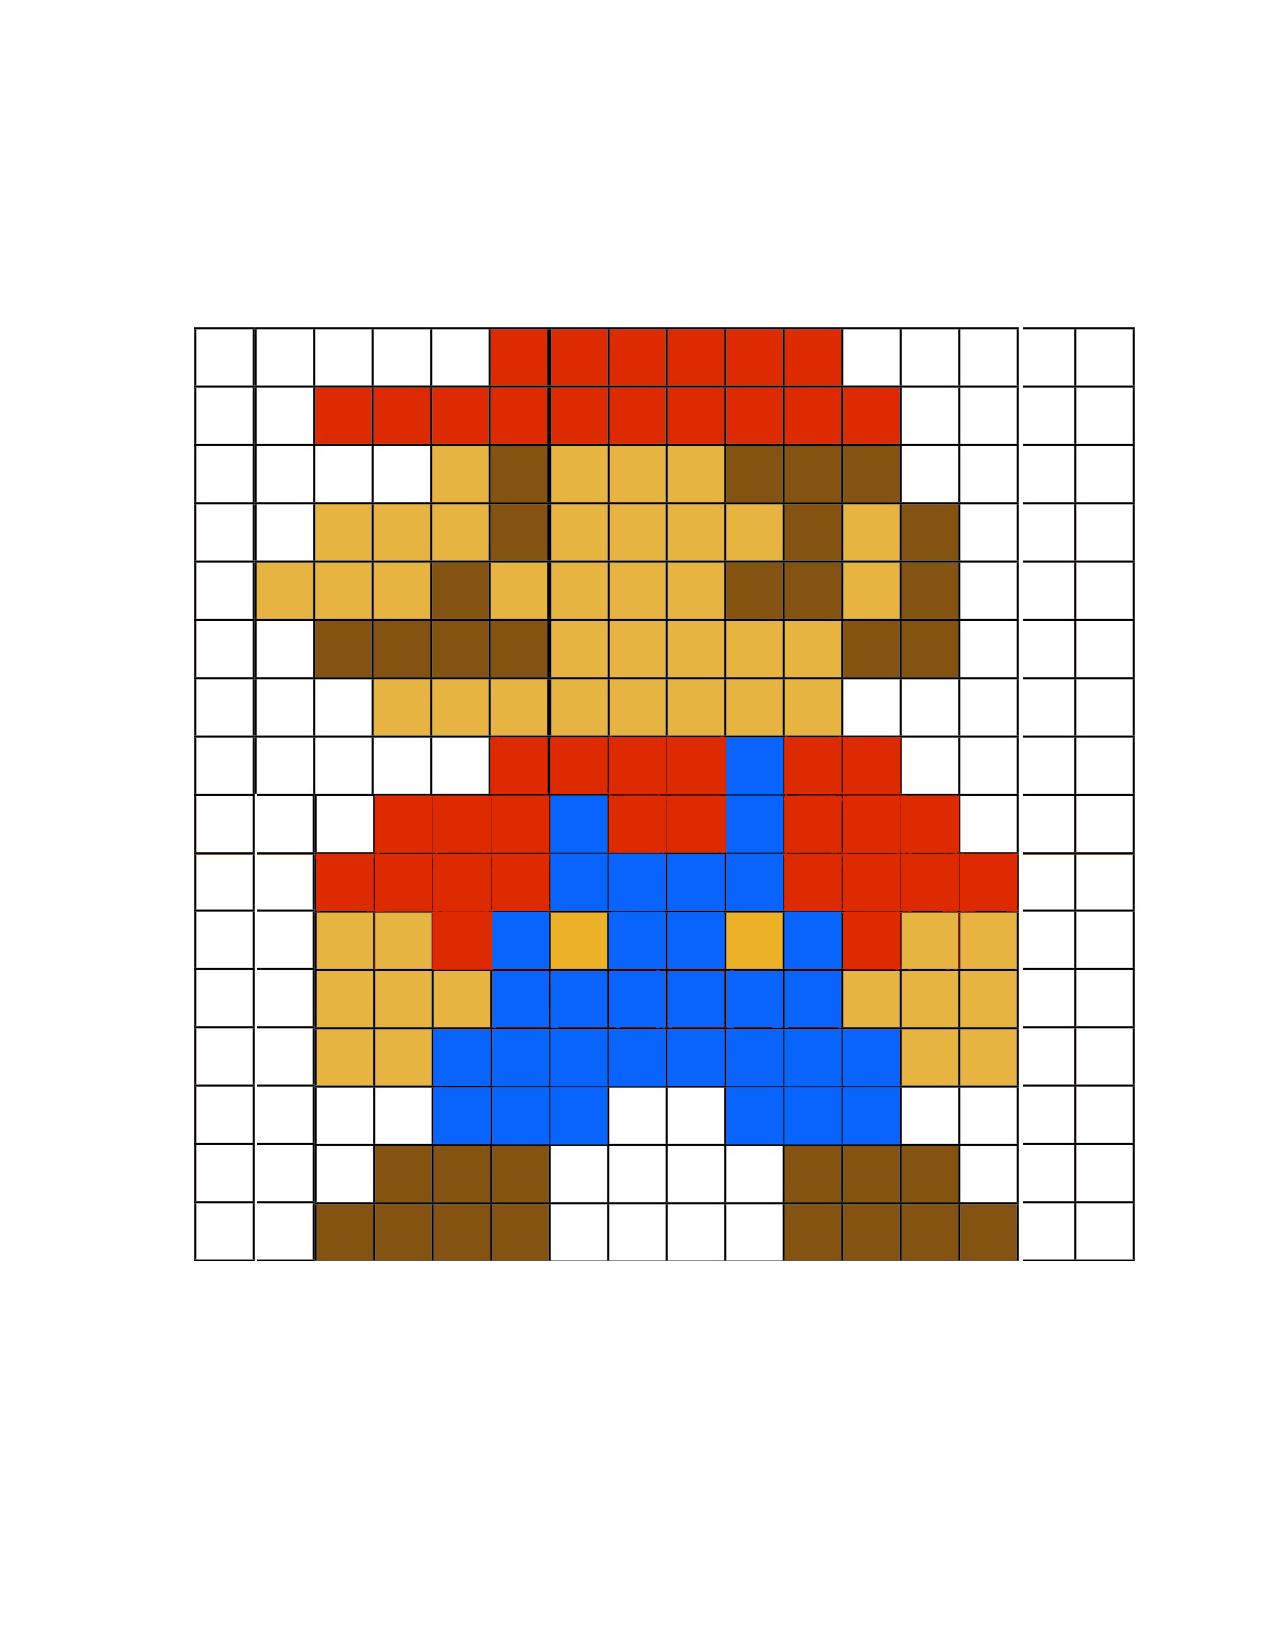 8 Bit Red and Blue Mario Facing Left.jpg